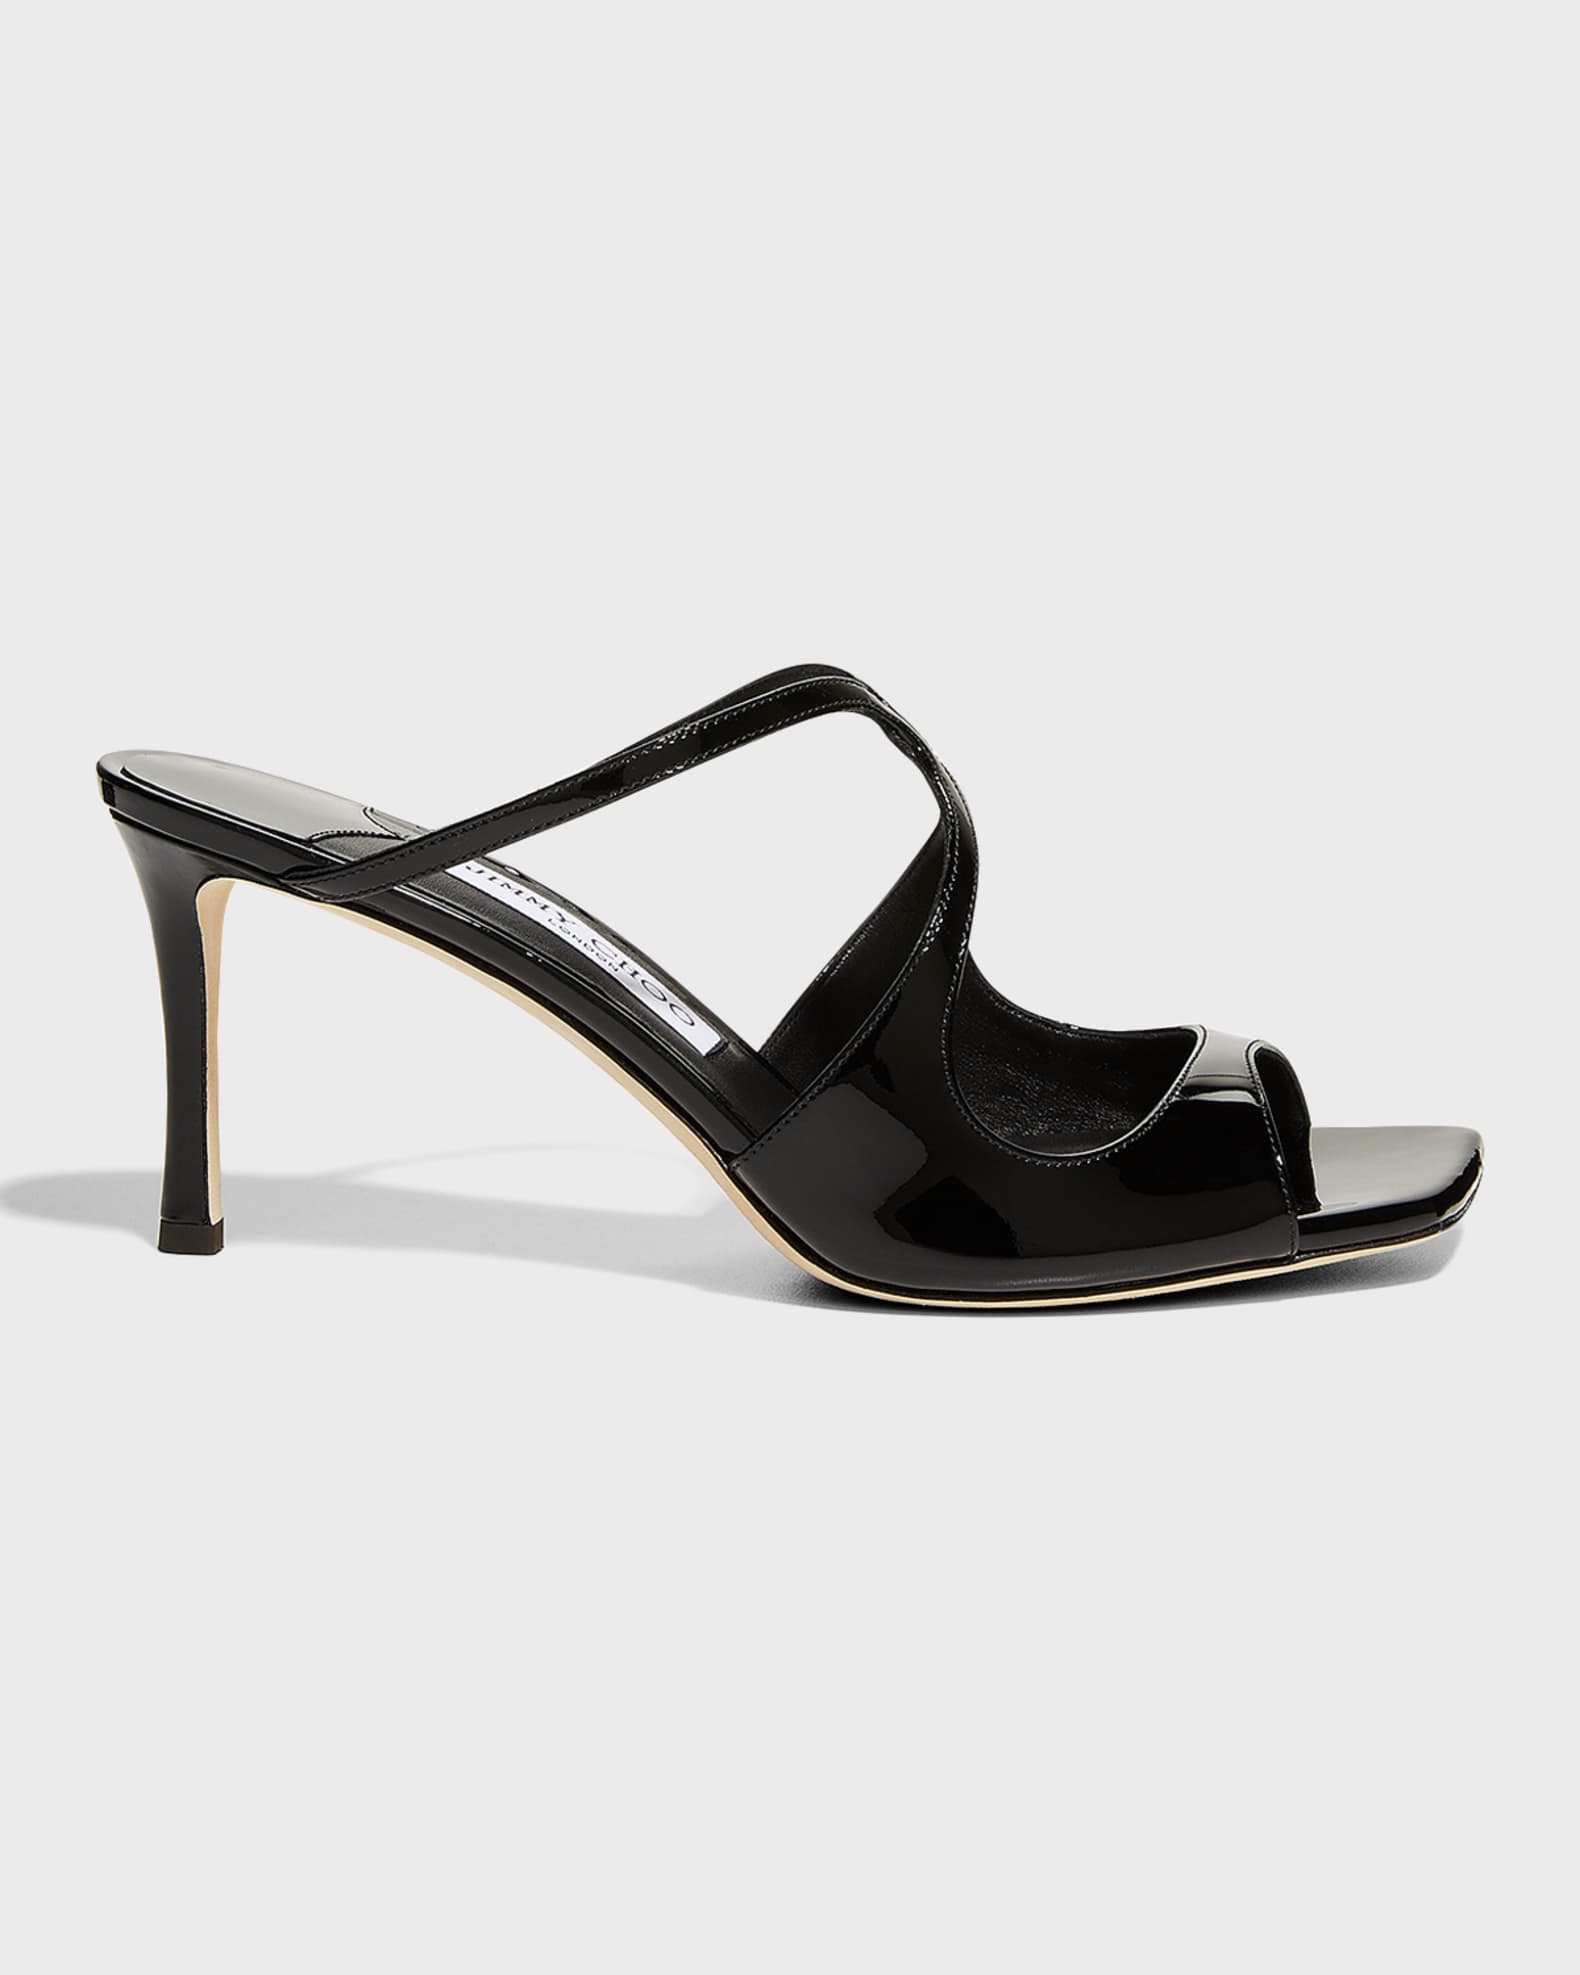 Jimmy Choo Anise Patent Leather Slide Sandals | Neiman Marcus